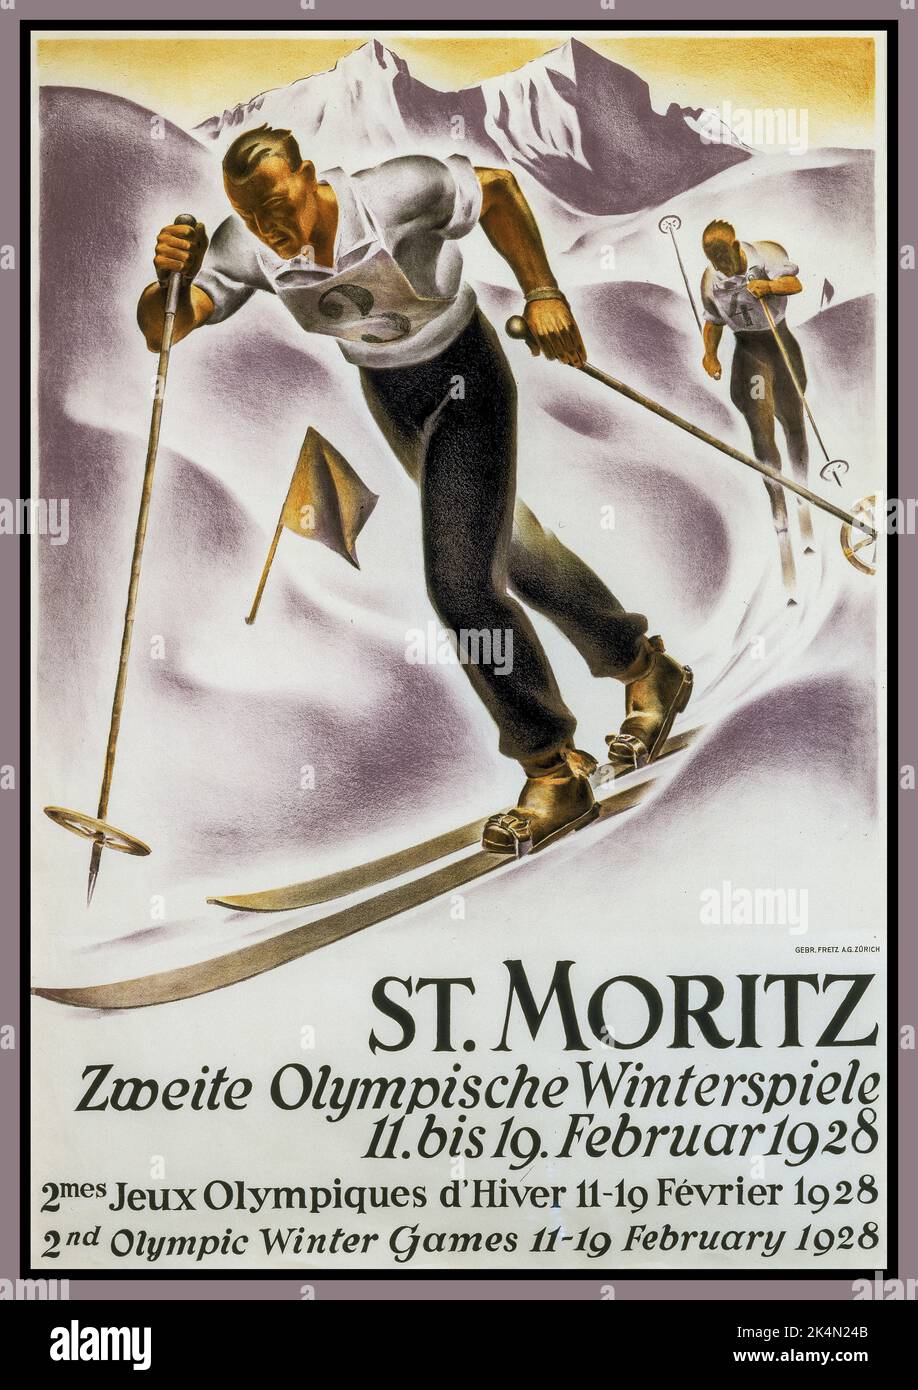 Download Vintage Image Of Winter Olympics Wallpaper